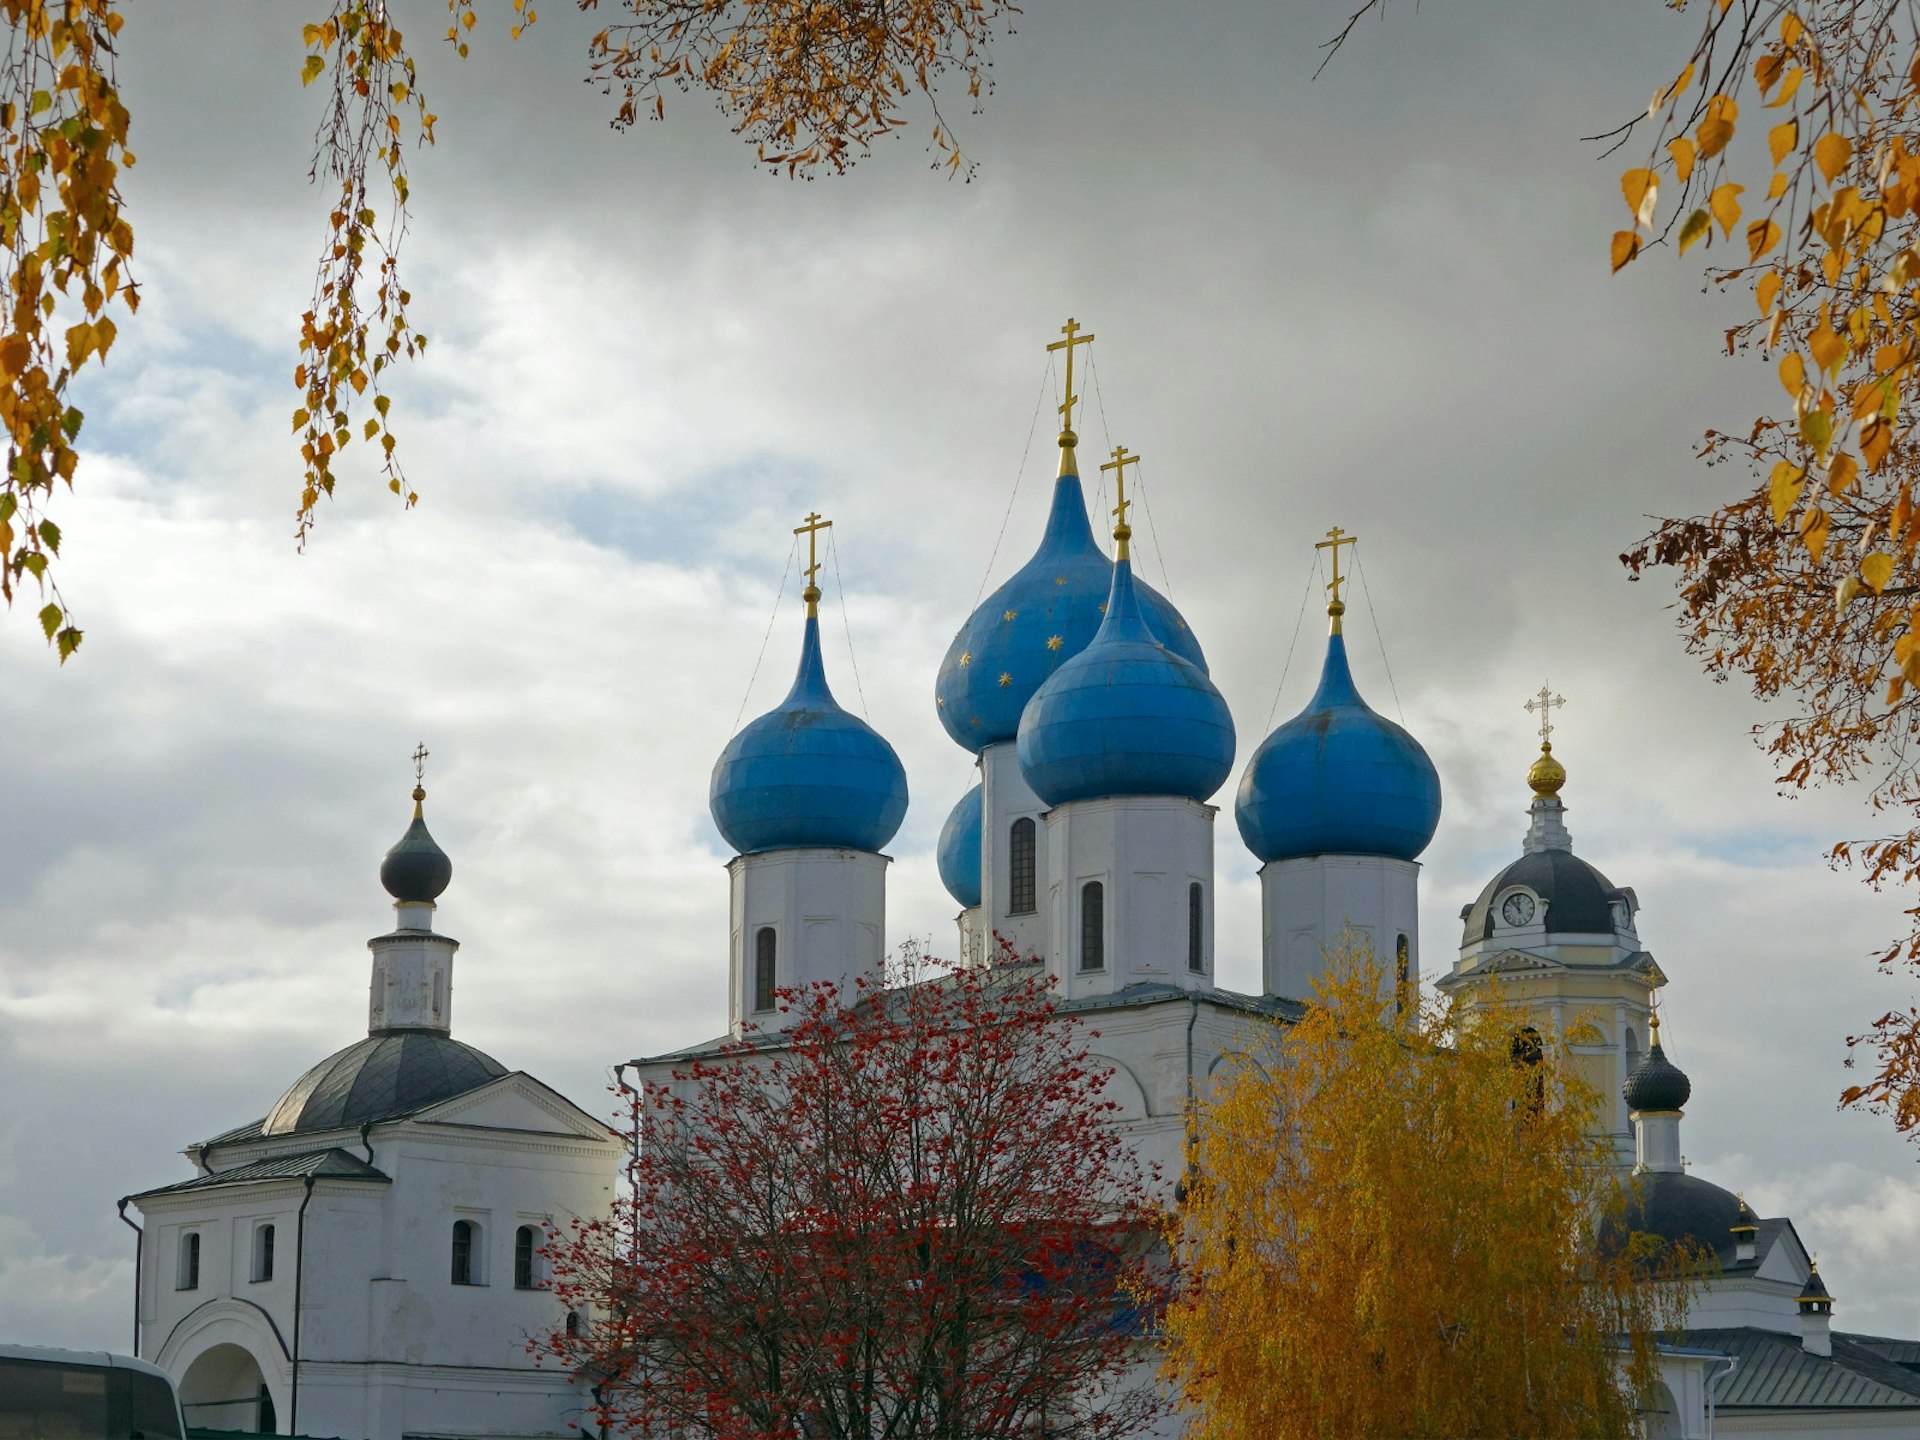 The gold-and-blue domes of the medieval Vysotsky monastery in Serpukhov © Luka Kikina / Shutterstock